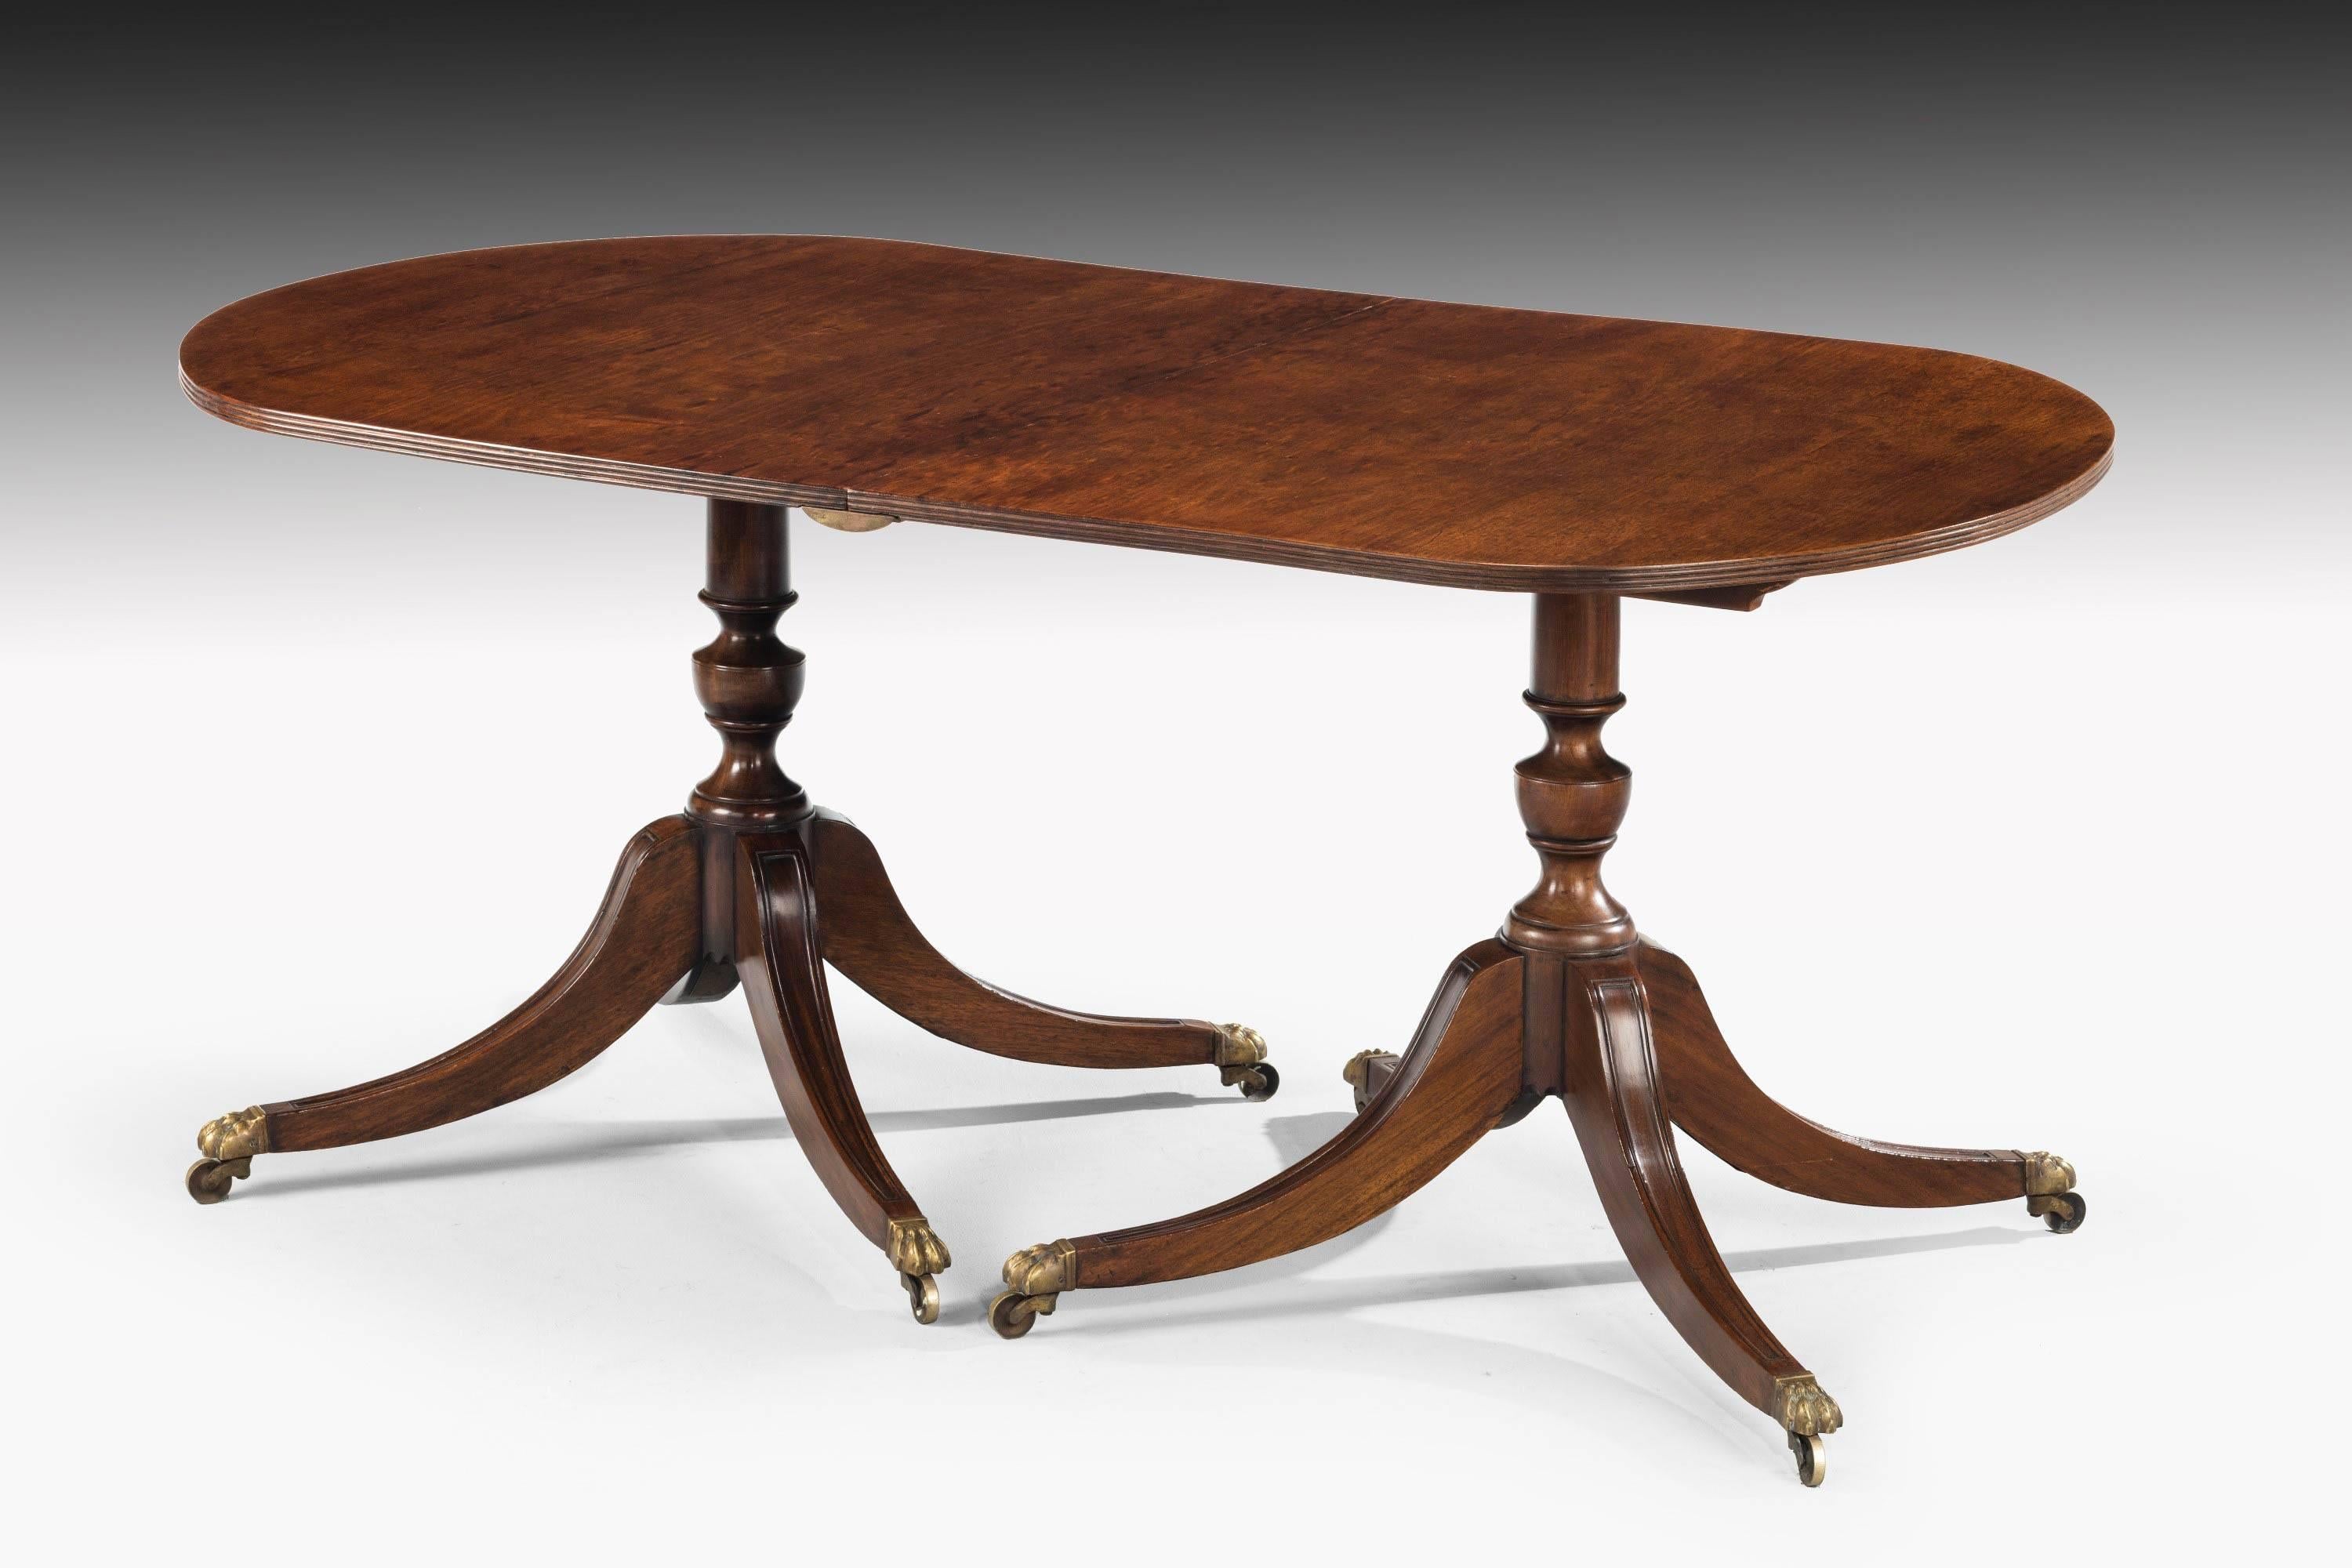 A George III style mahogany dining room table with a pair of shaped centre corns, Swept quadruple base with one extra leaf.